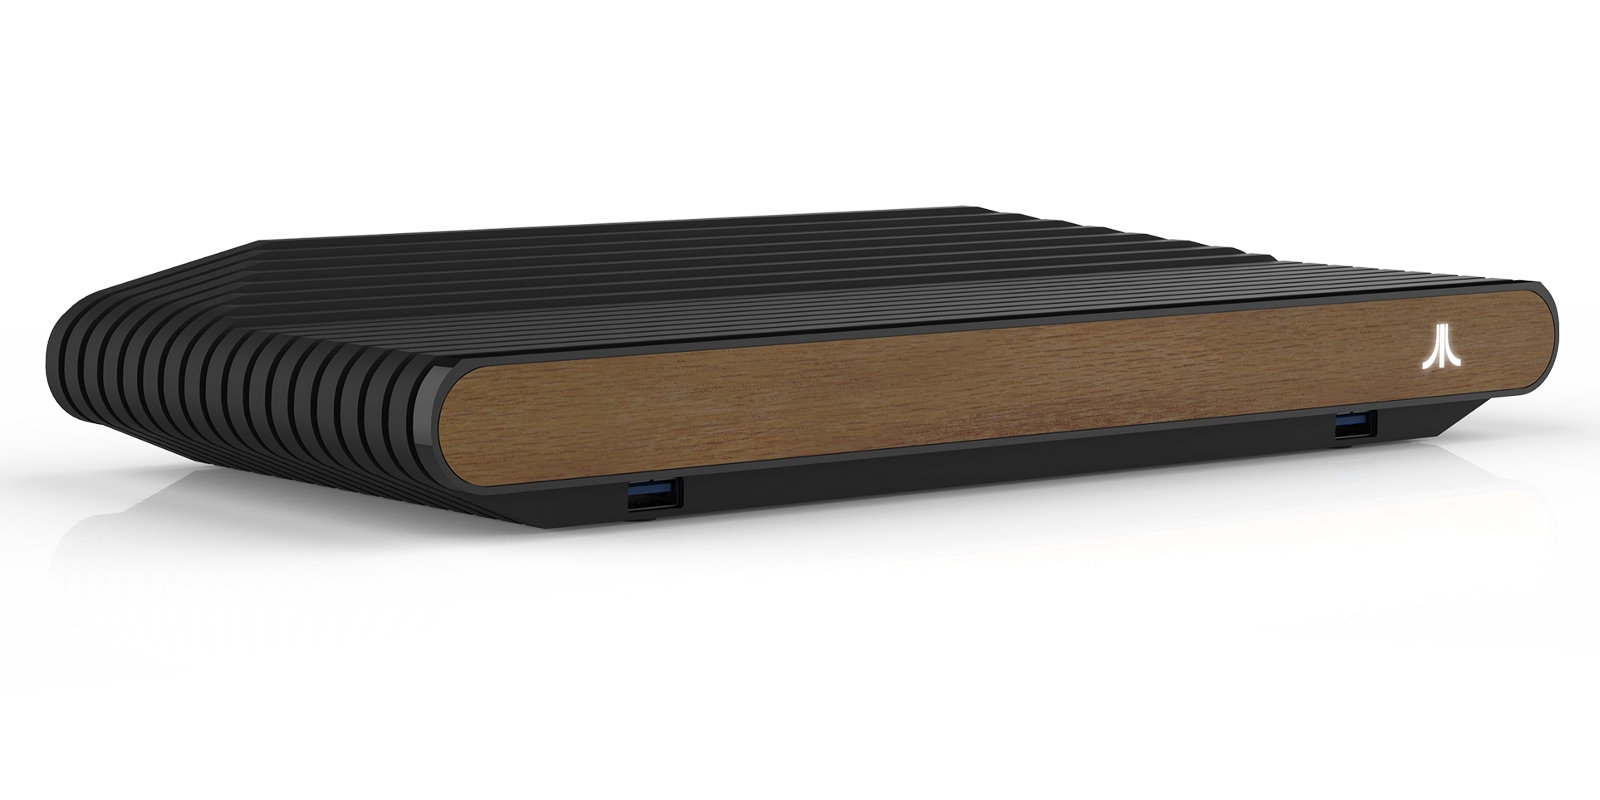 Finished Atari VCS design pays homage to its 2600 roots | DeviceDaily.com